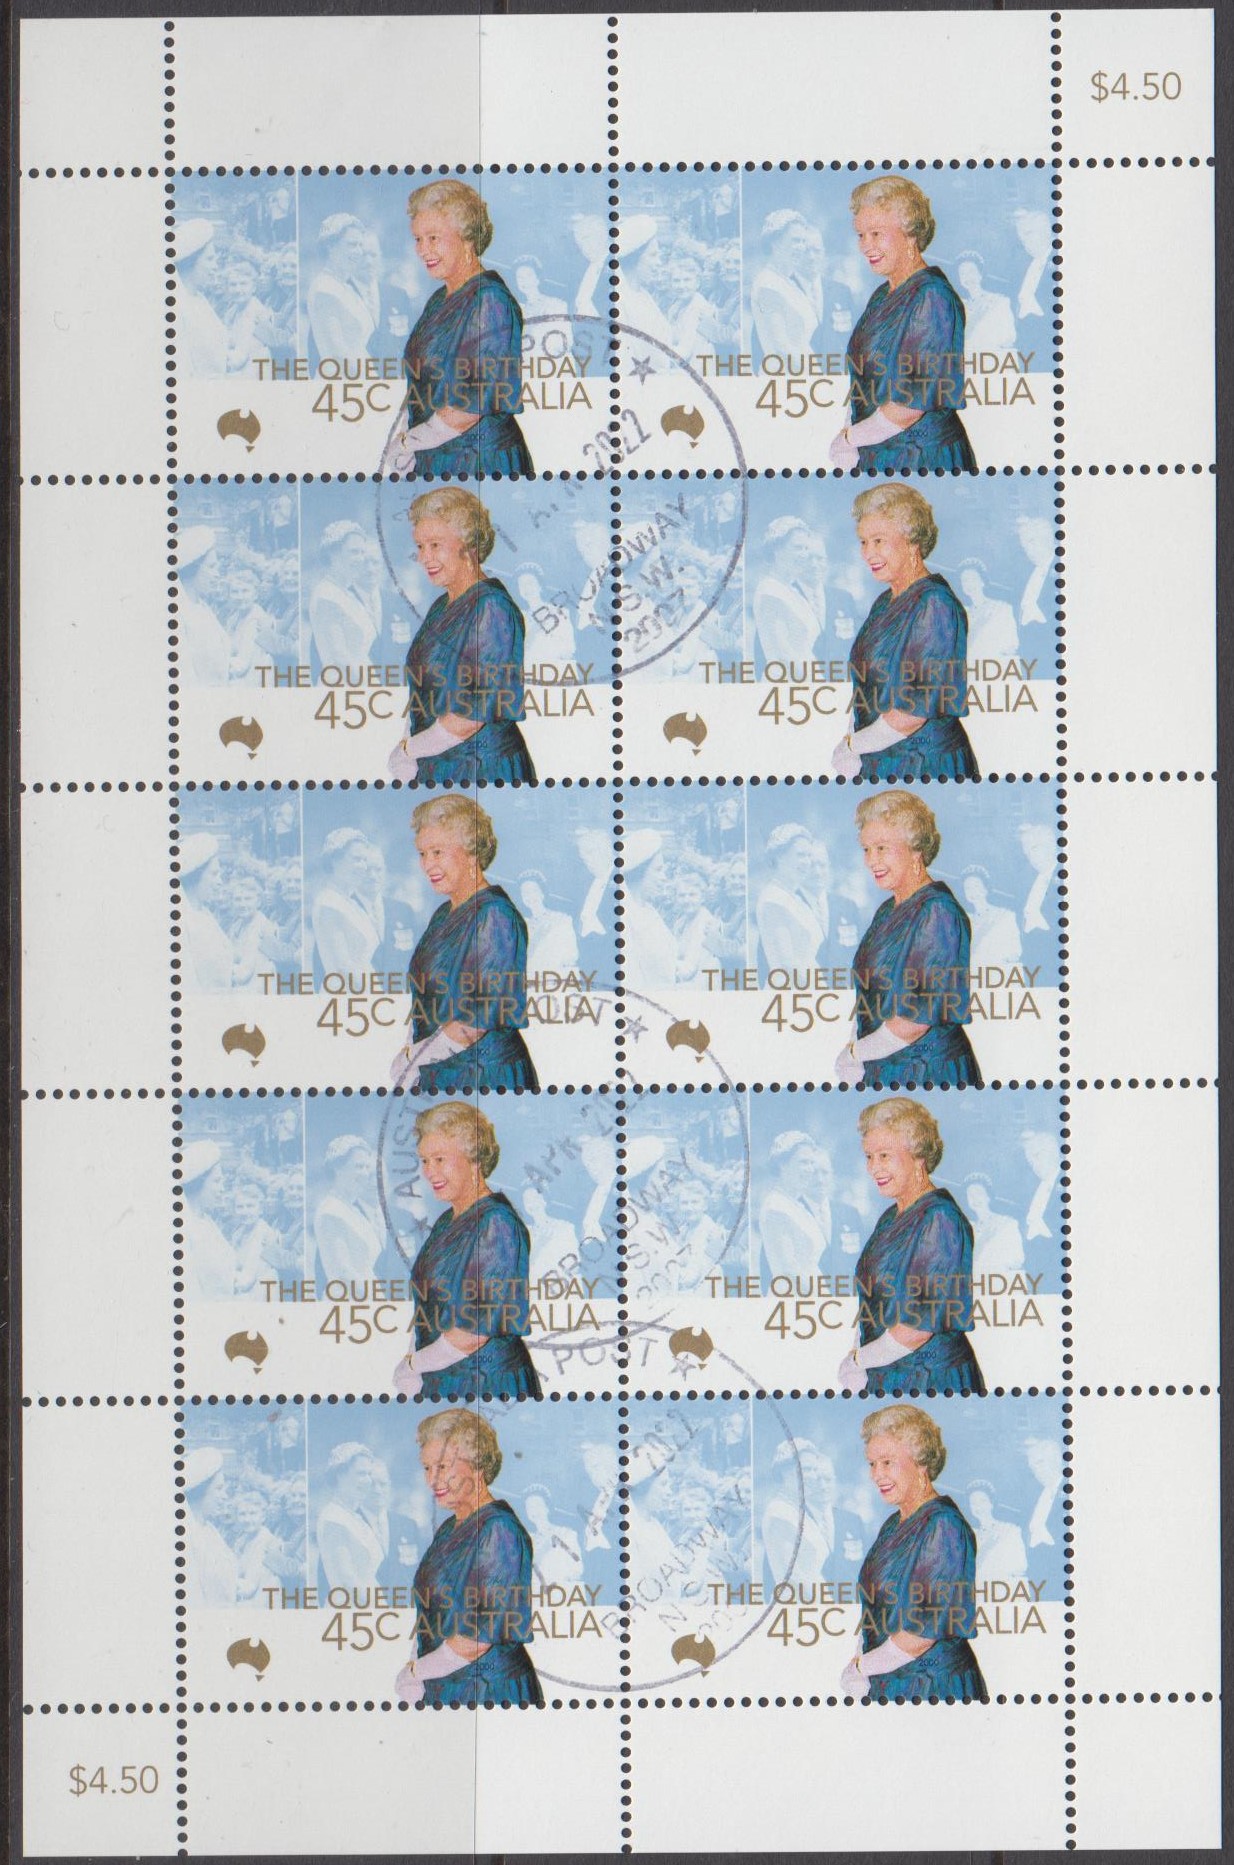 2000 The Queen's Birthday Sheetlet CTO - Peter Walters Stamps